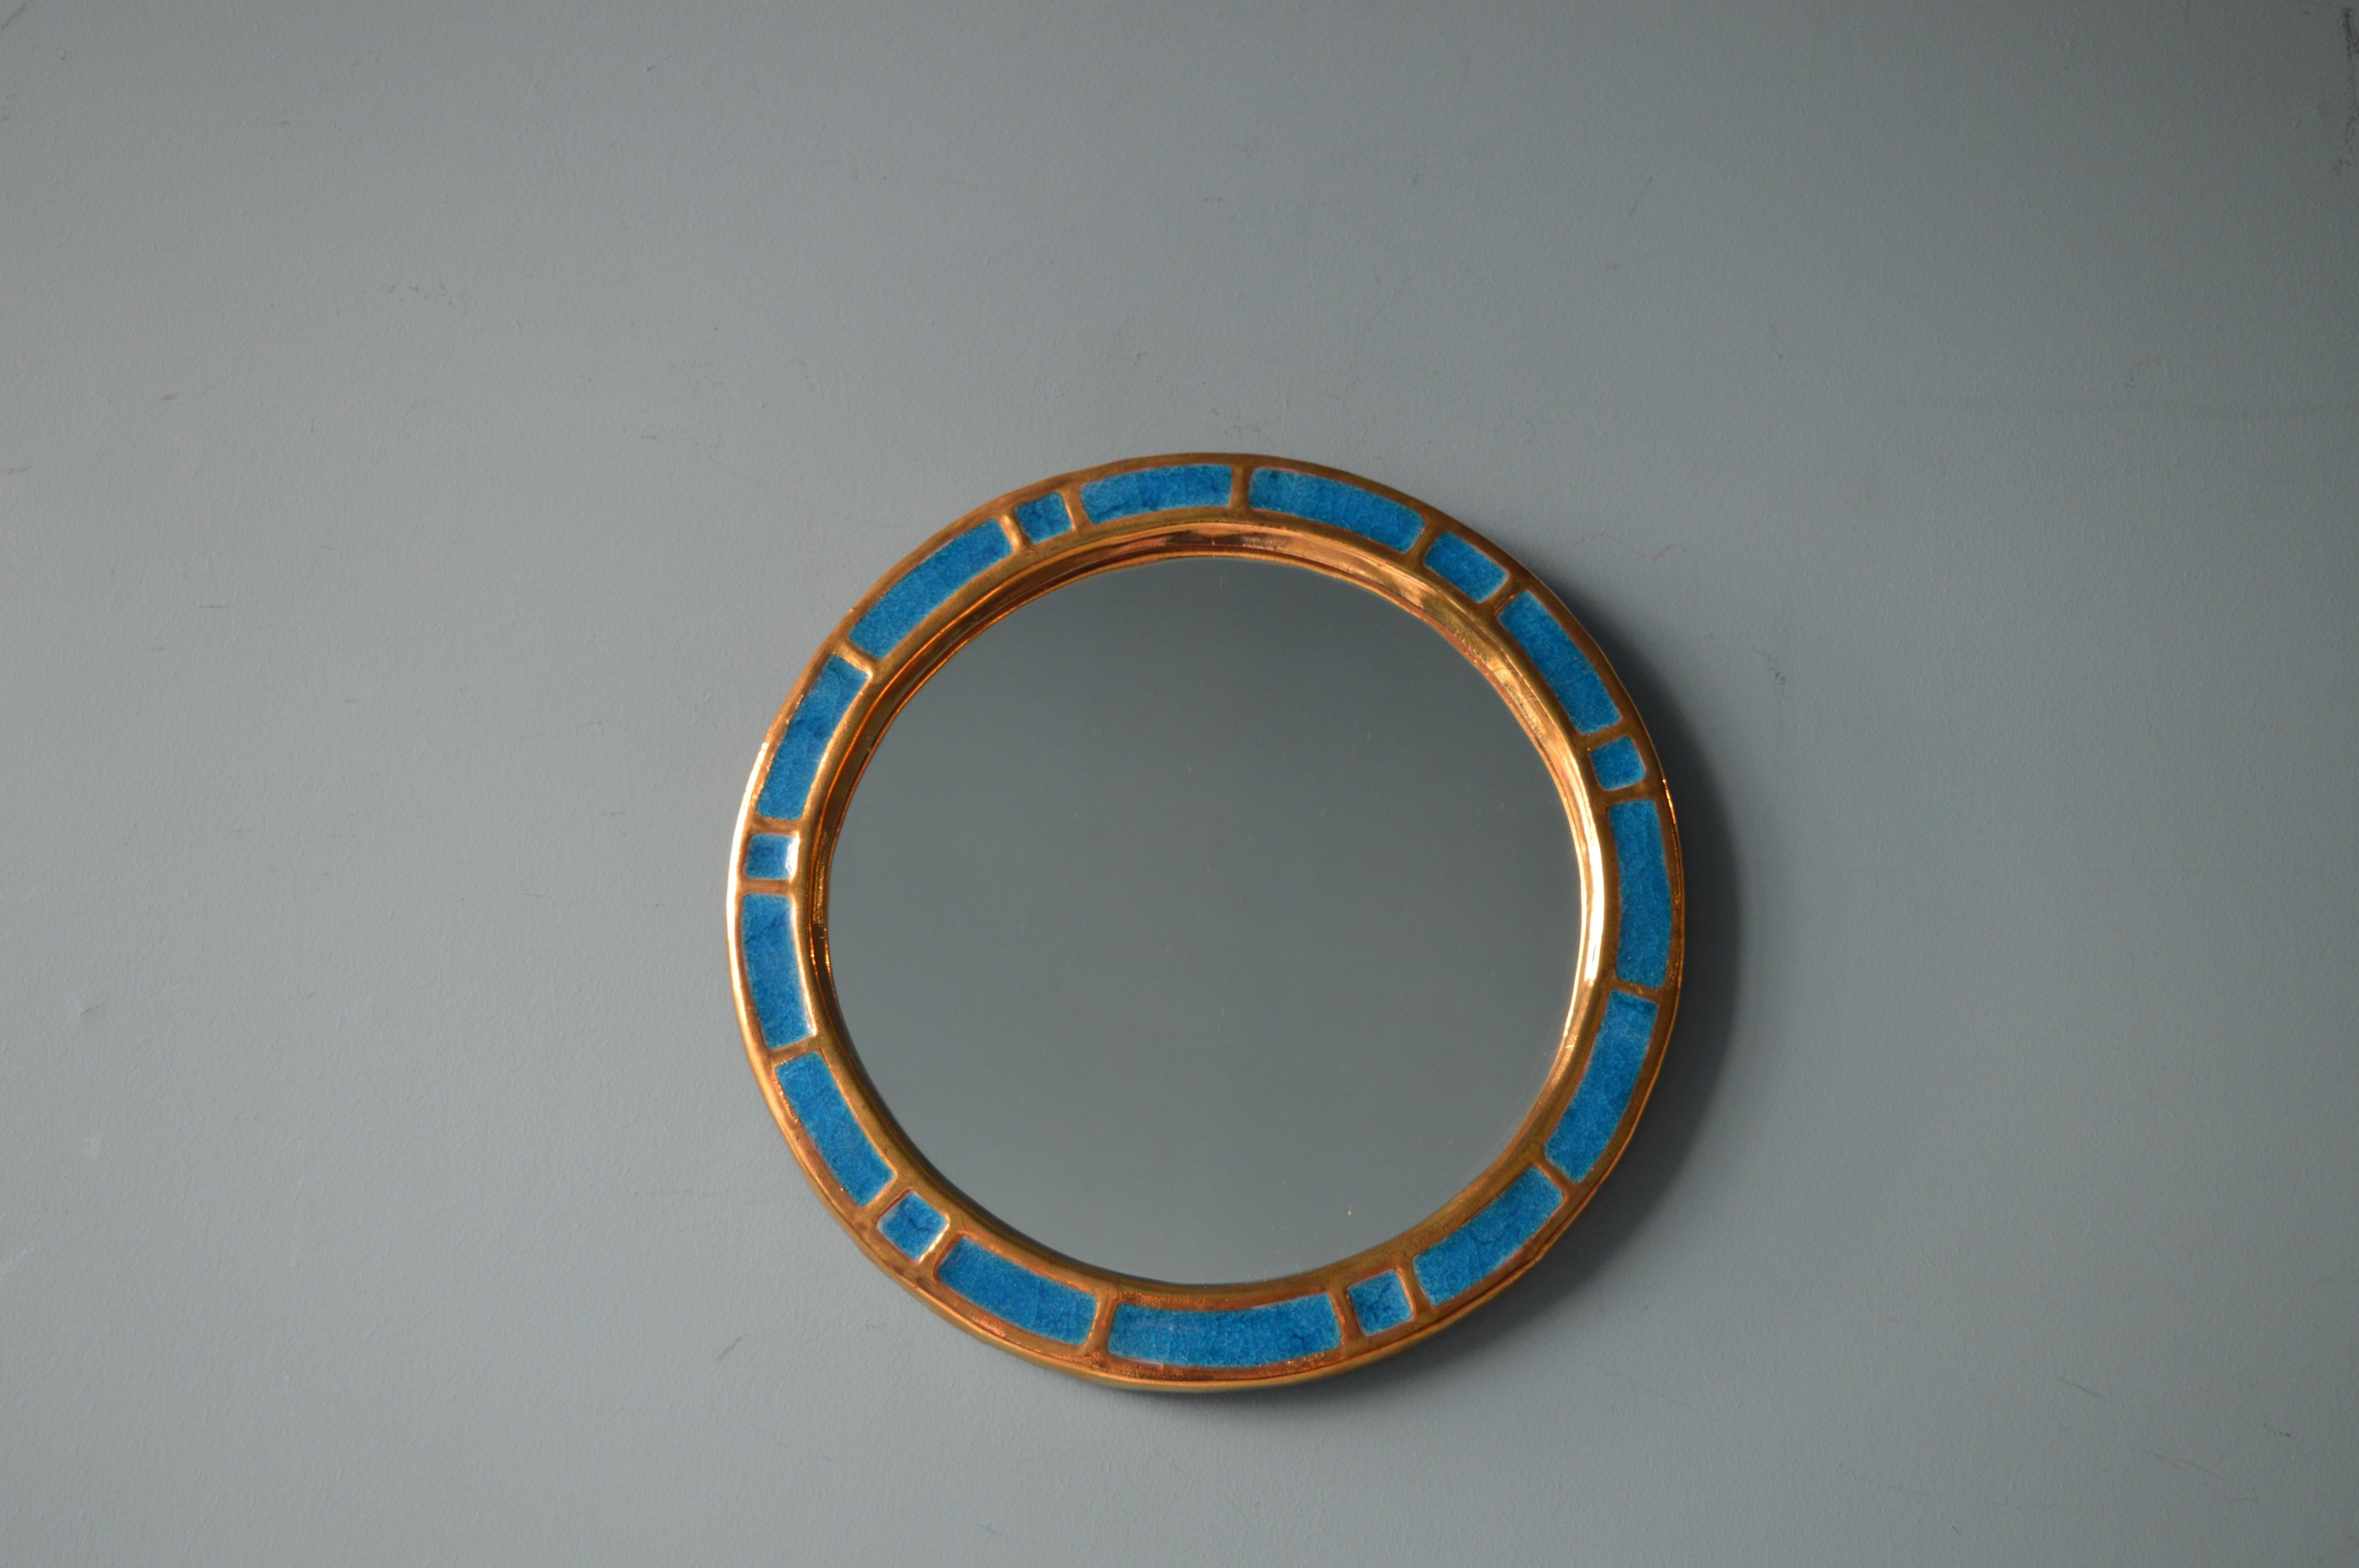 Mirror by Mithé Espelt.
Ceramic, gold an blue fused glass.
French work, circa 1960.